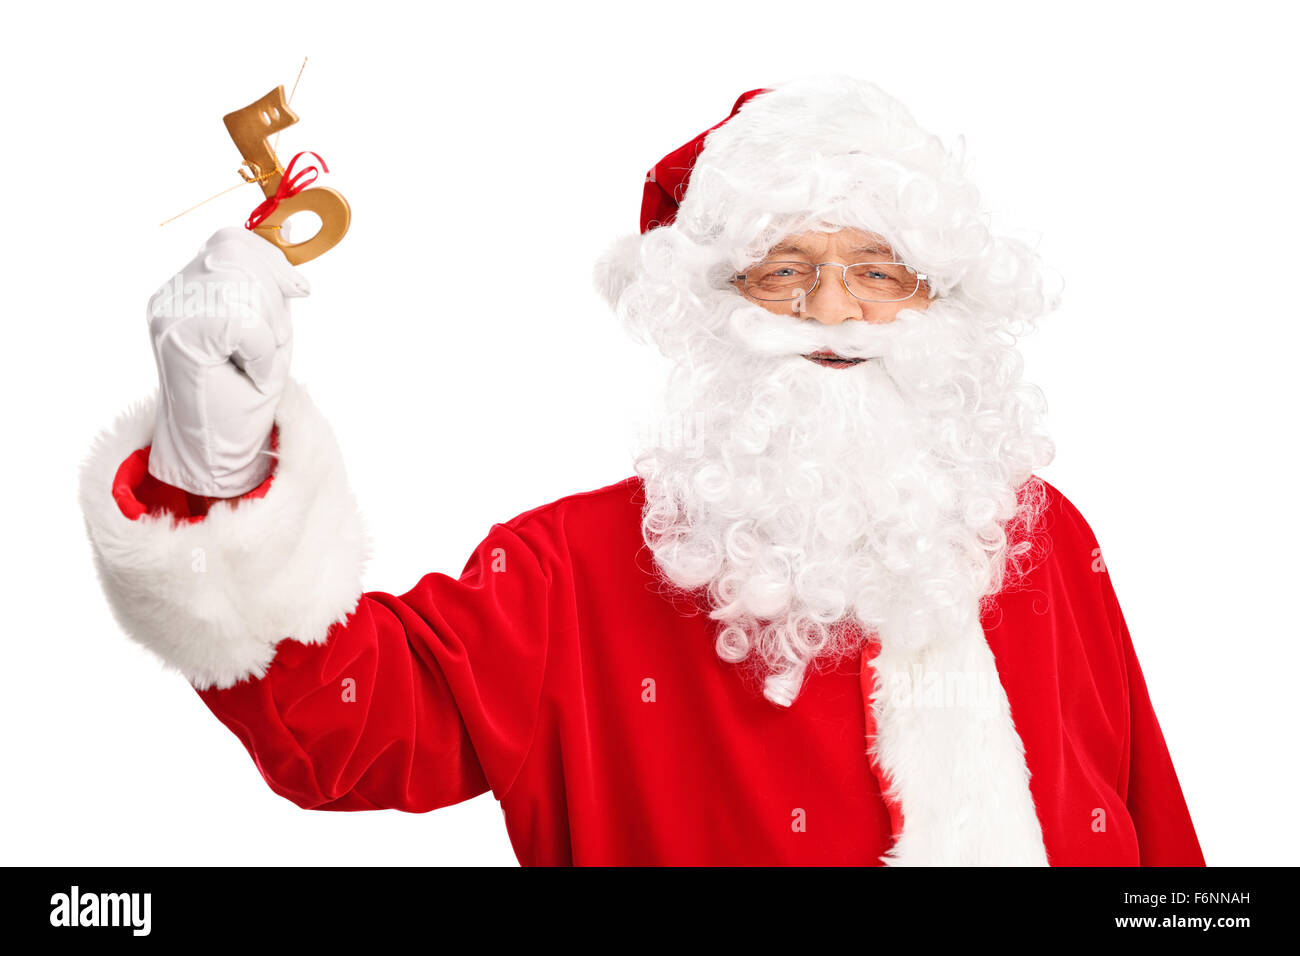 Studio shot of Santa Claus holding a key wrapped with red ribbon isolated on white background Stock Photo